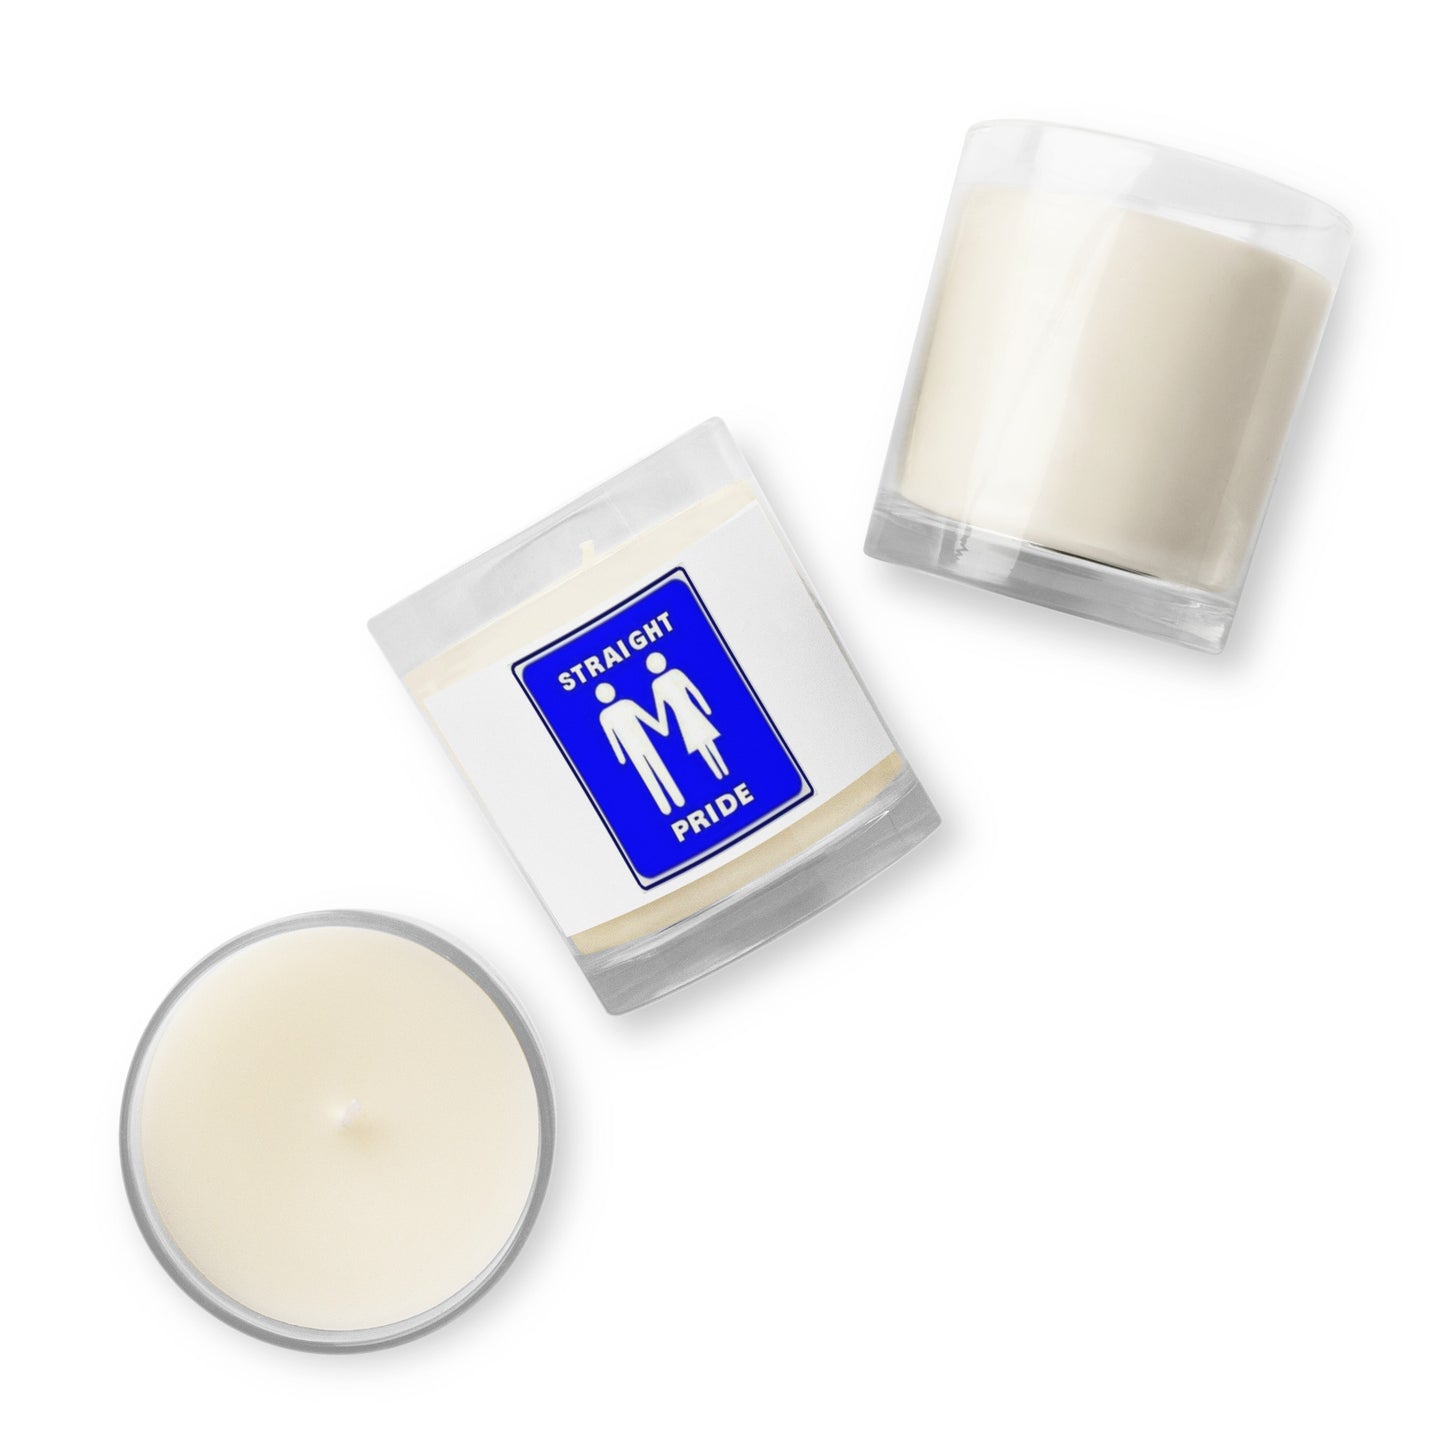 Straight Pride Candle